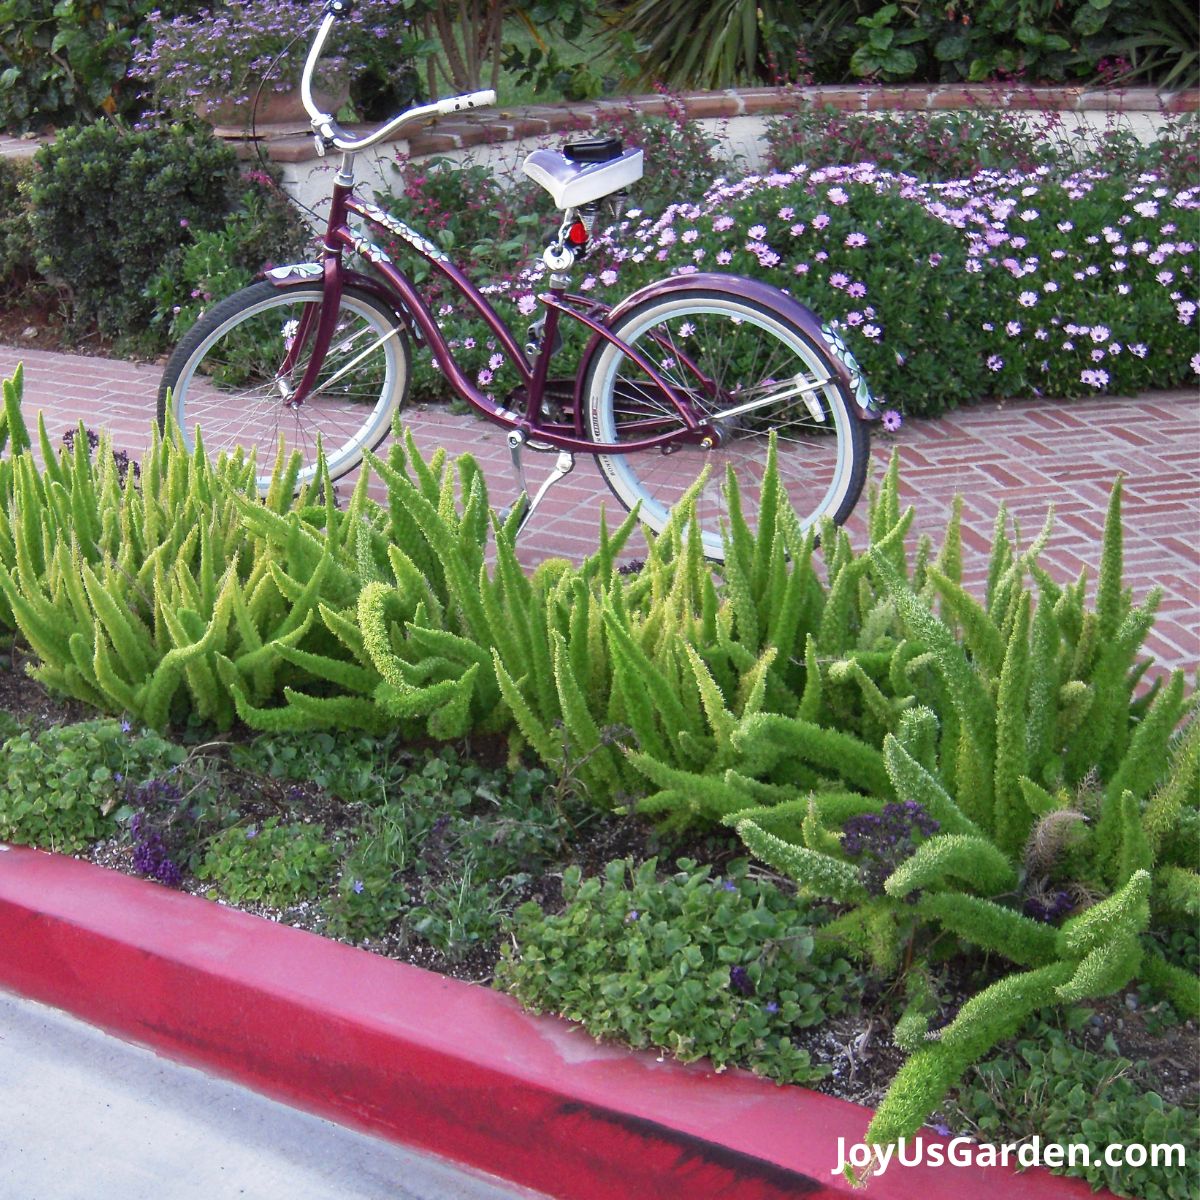 foxtail ferns growing on the sidewalk, there is a burgundy beach cruiser in the background and flowering plants